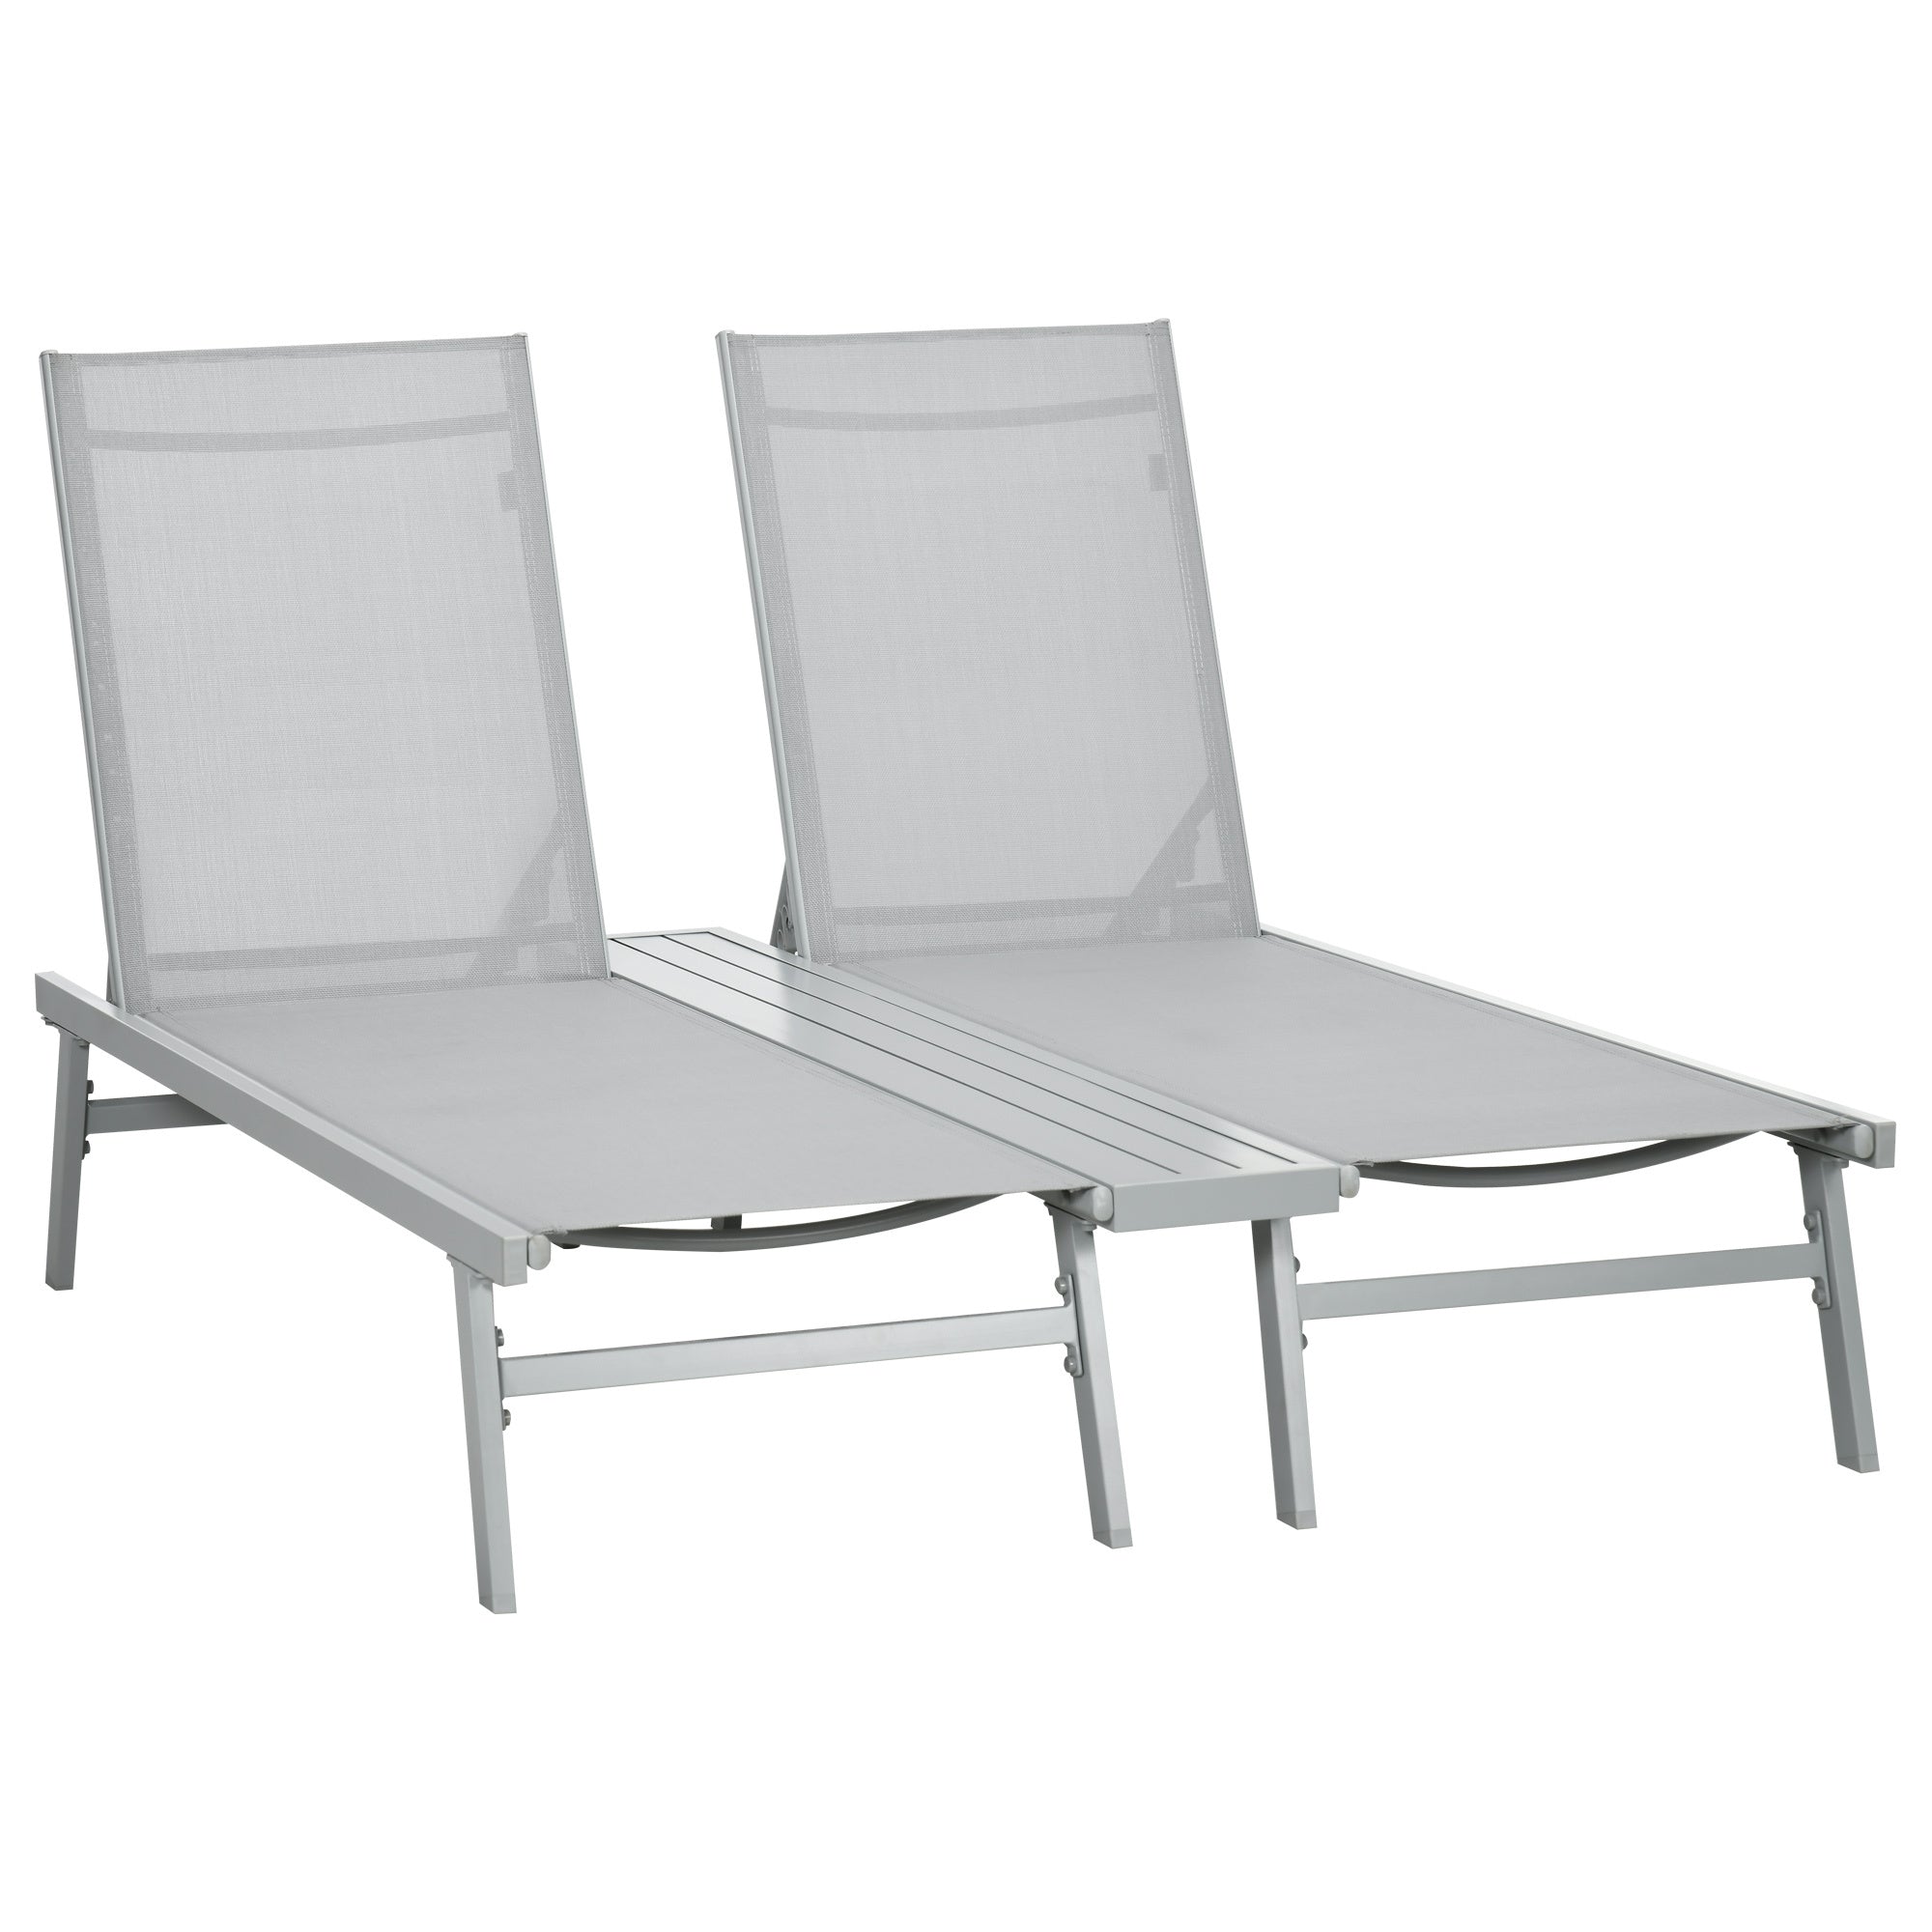 Chaise Lounge Pool Chairs Set of 2, Aluminum